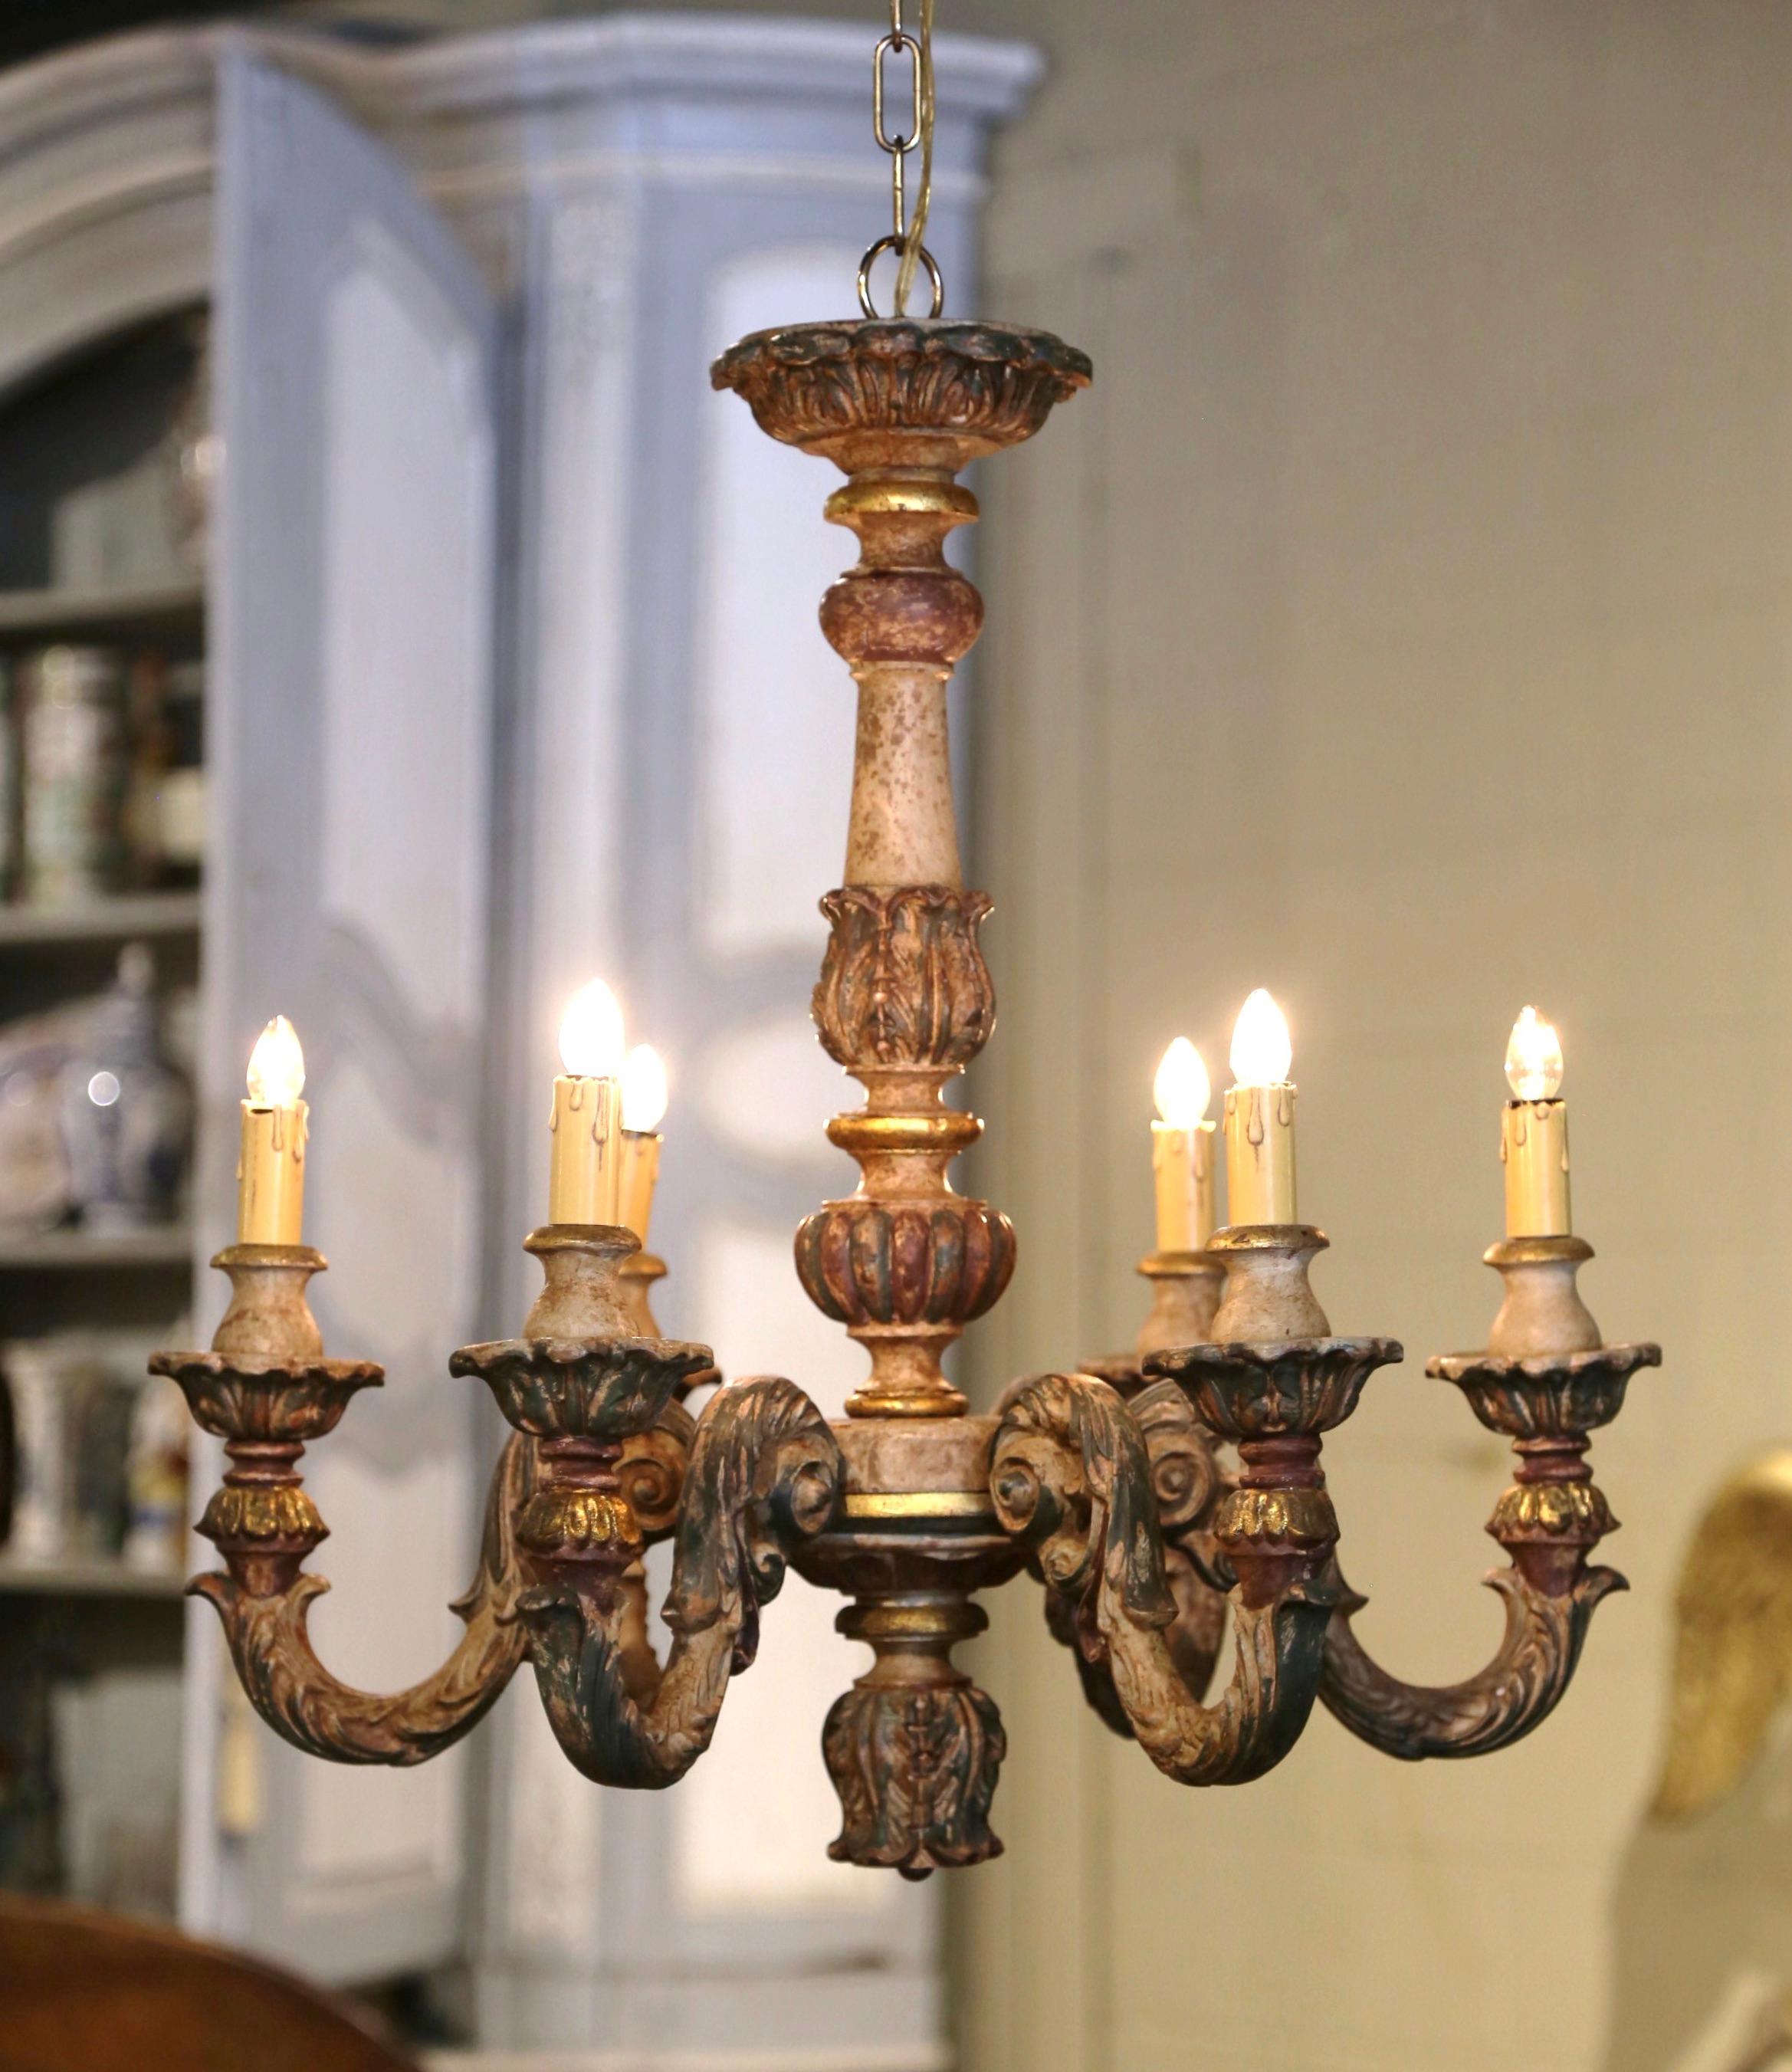 19th Century French Napoleon III Carved Polychrome Painted Six-Light Chandelier In Excellent Condition For Sale In Dallas, TX